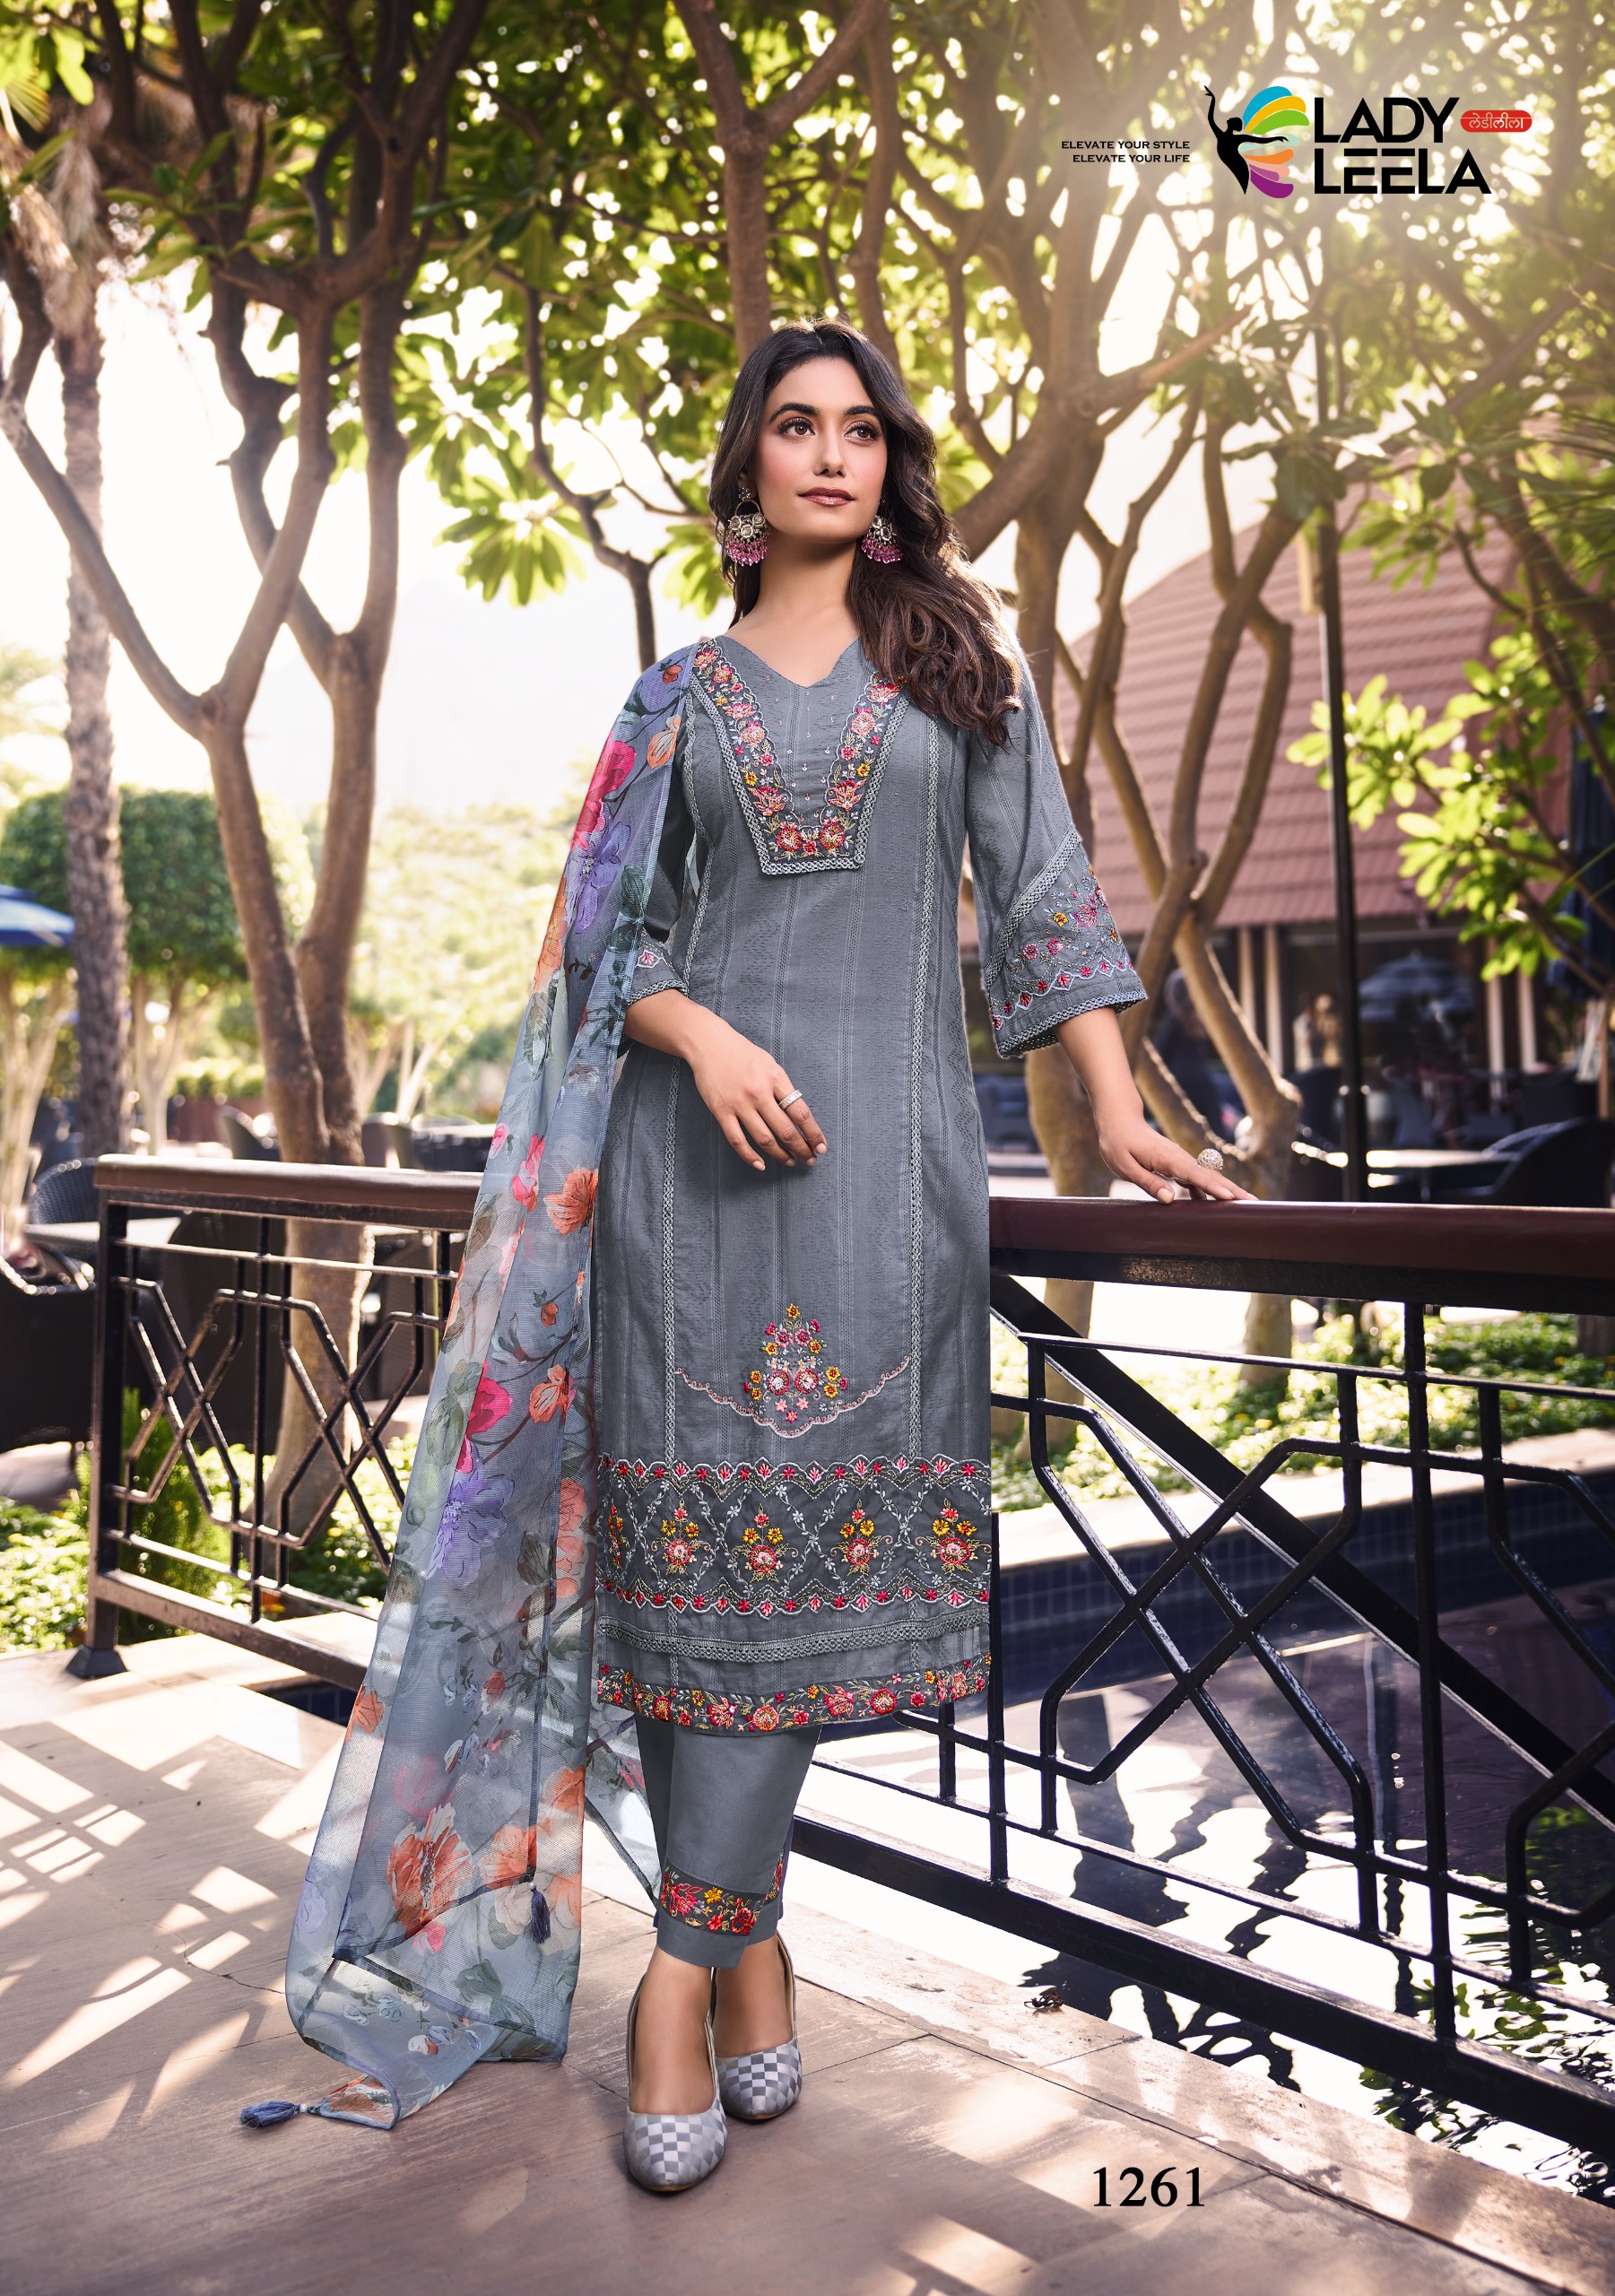 Lady Leela Summer Trends collection 7